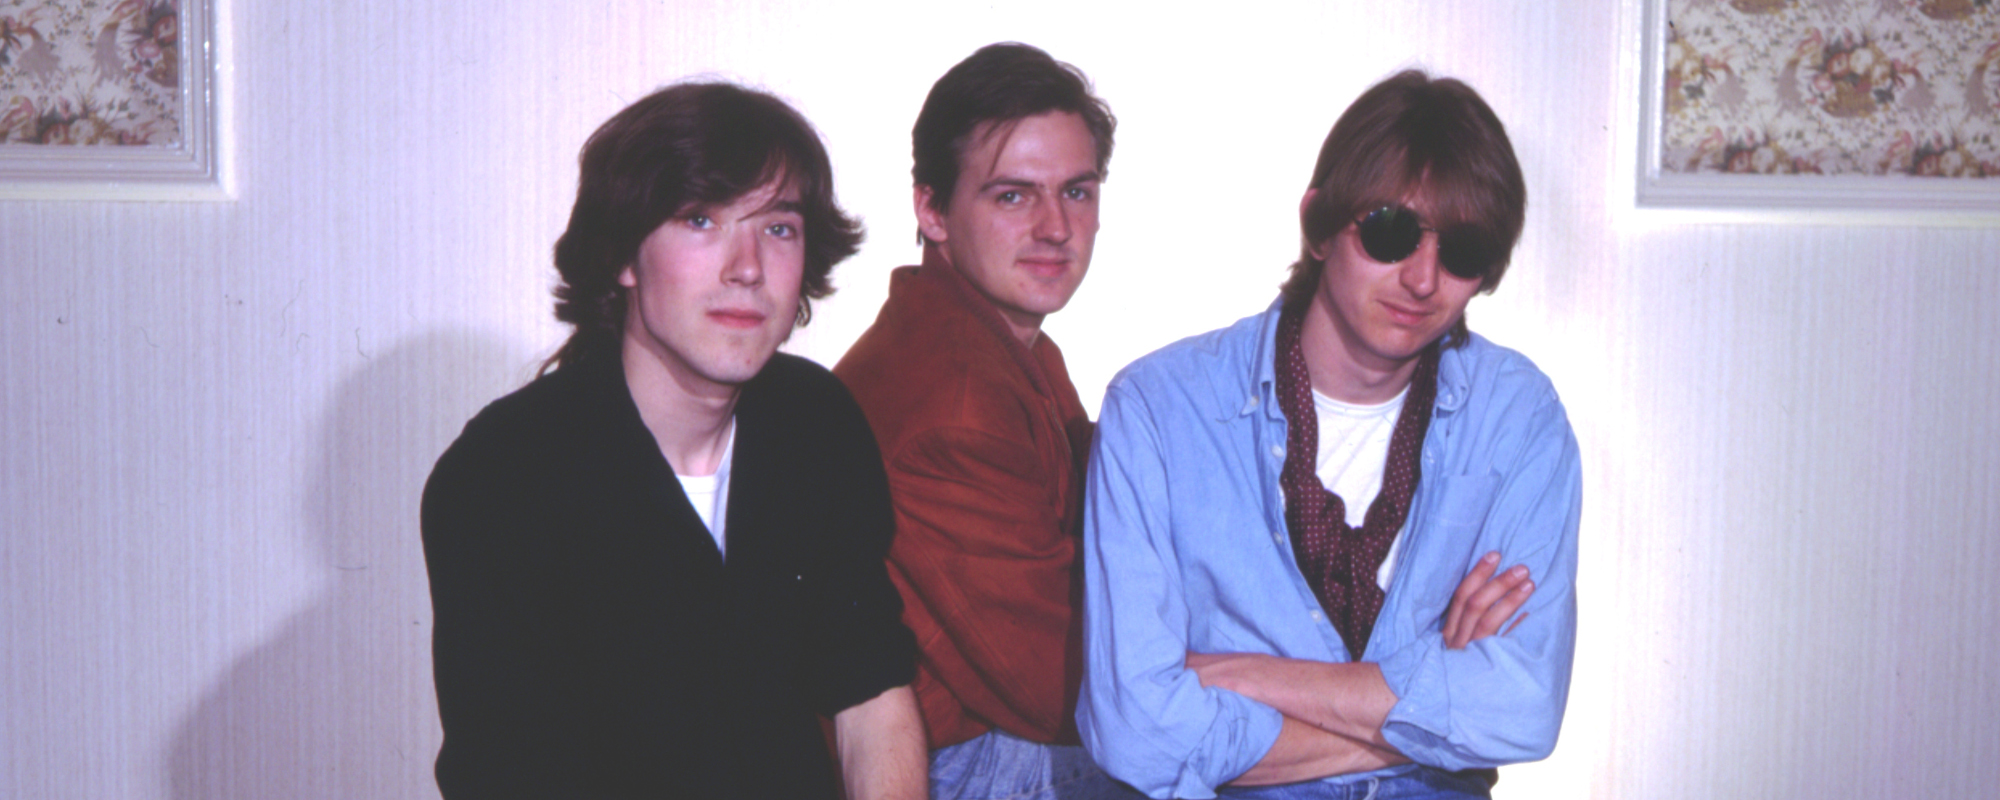 The Meaning Behind “It’s My Life” by Talk Talk and Why Their Music Was About Soul, Not Misery